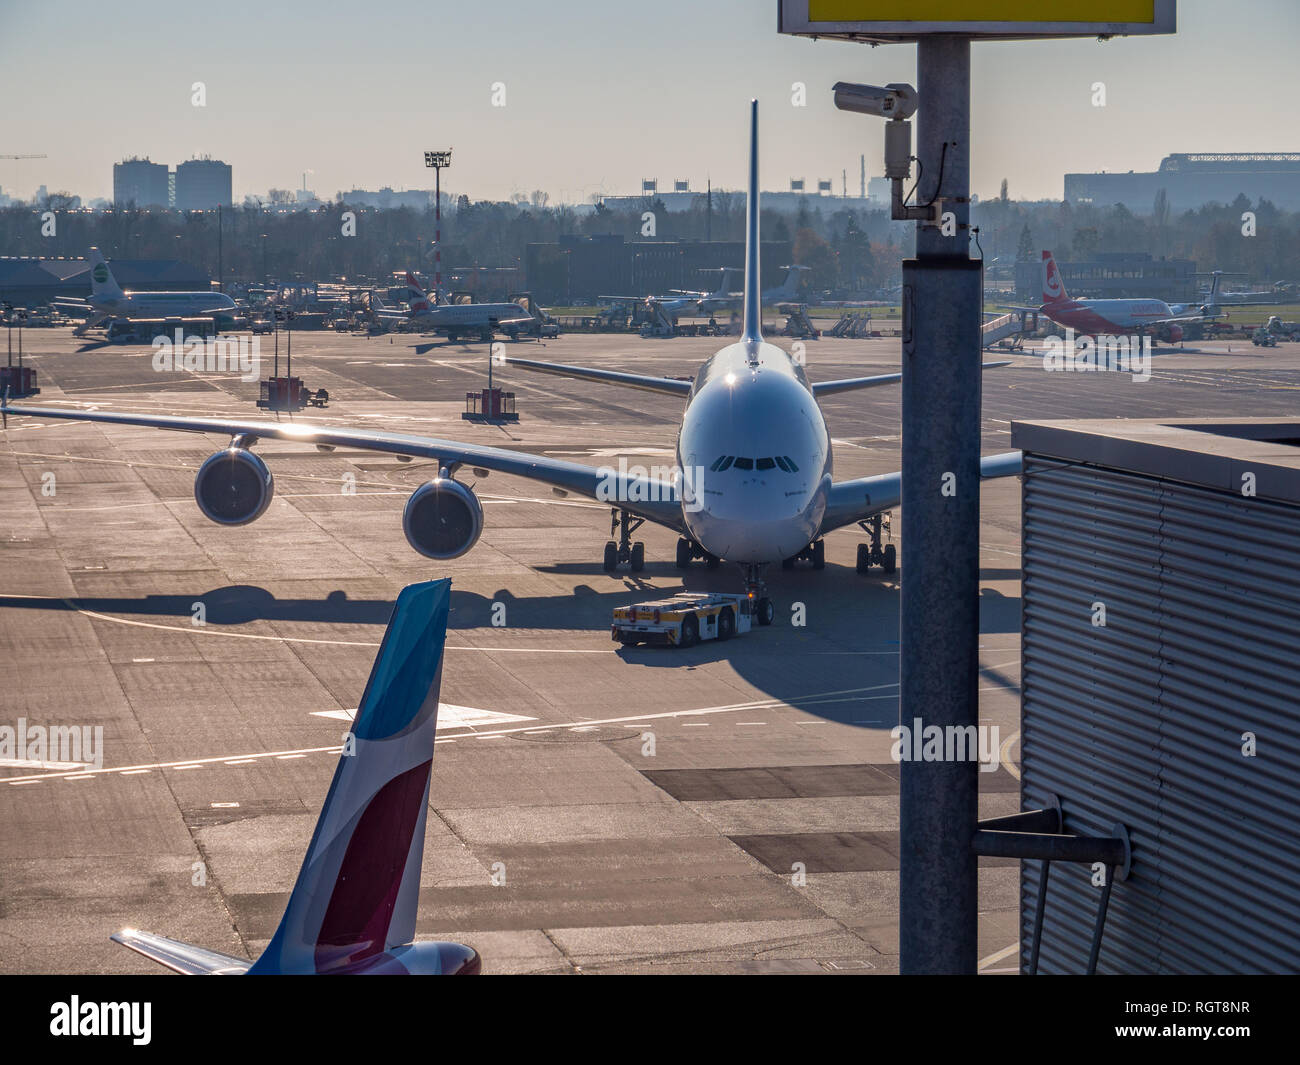 A big 'bird' during taxi. Airbus A380-800 at DUS International Airport, Germany. Stock Photo